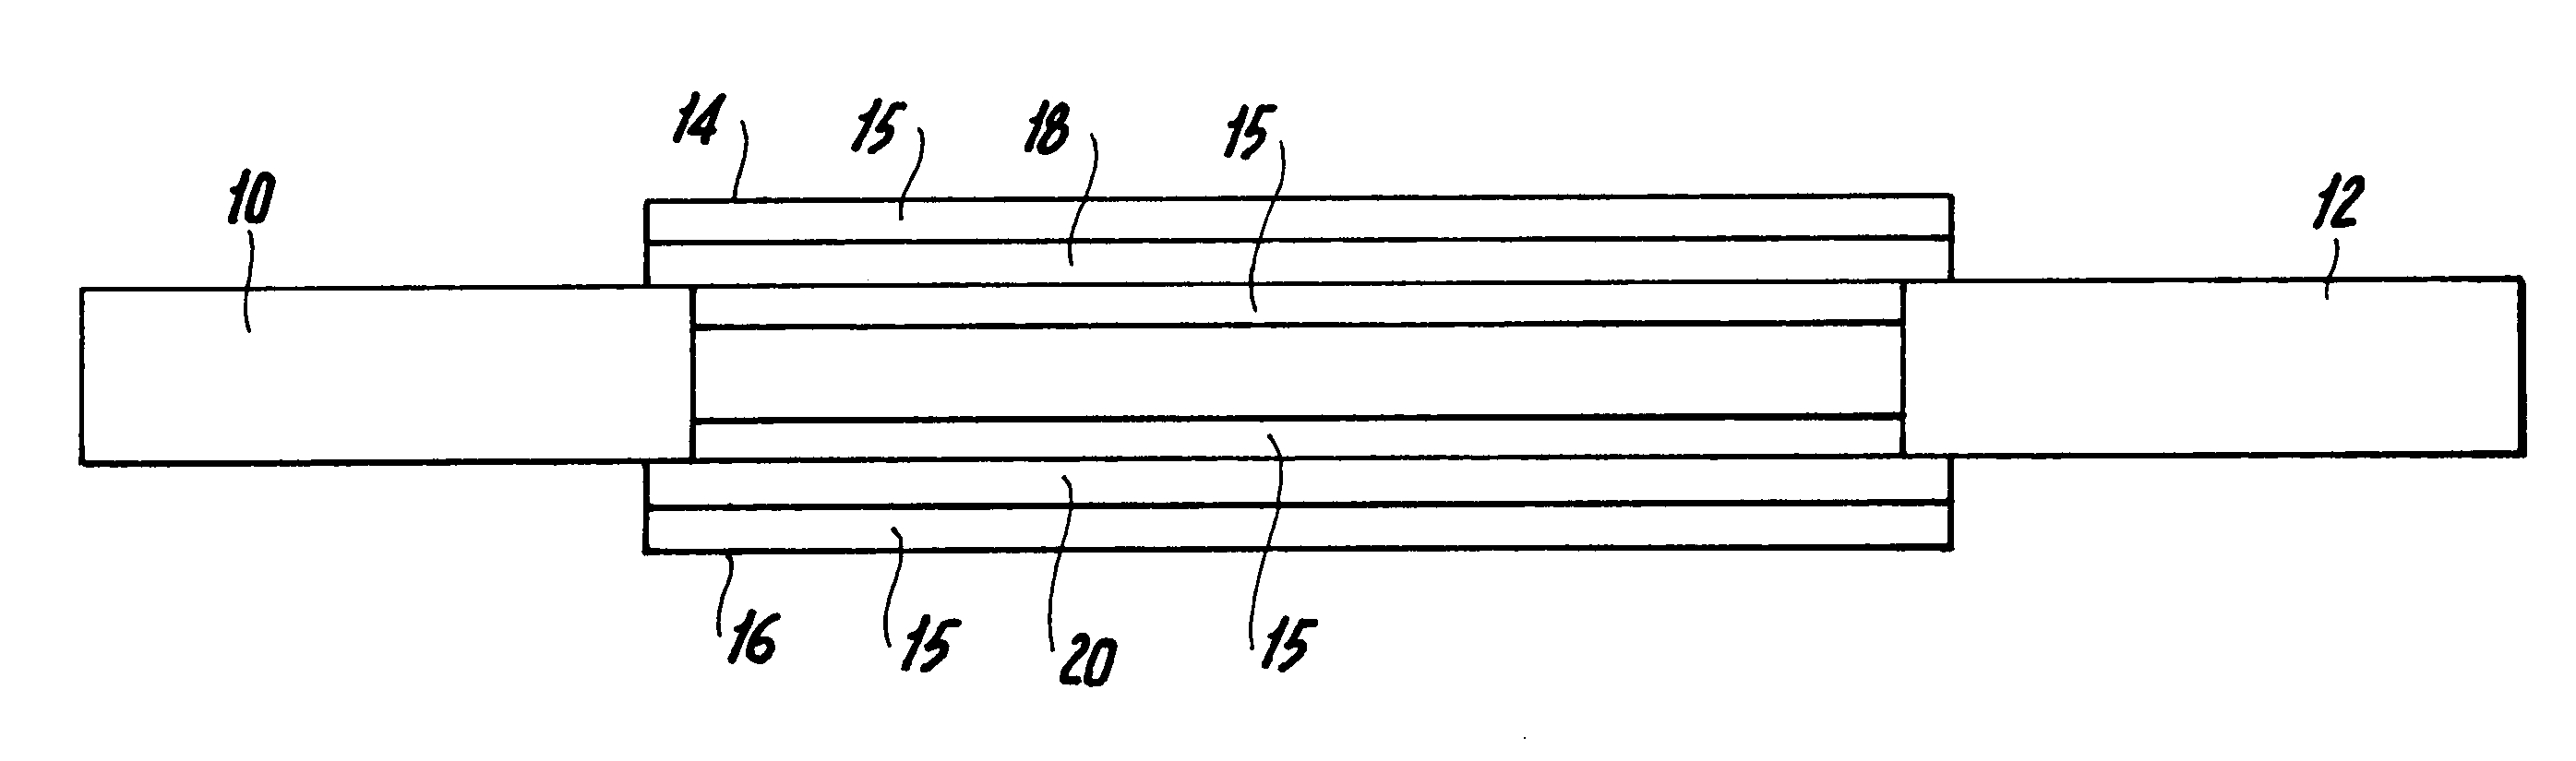 Method and apparatus to pre-form two or more integrated connectorless cables in the flexible sections of rigid-flex printed circuit boards